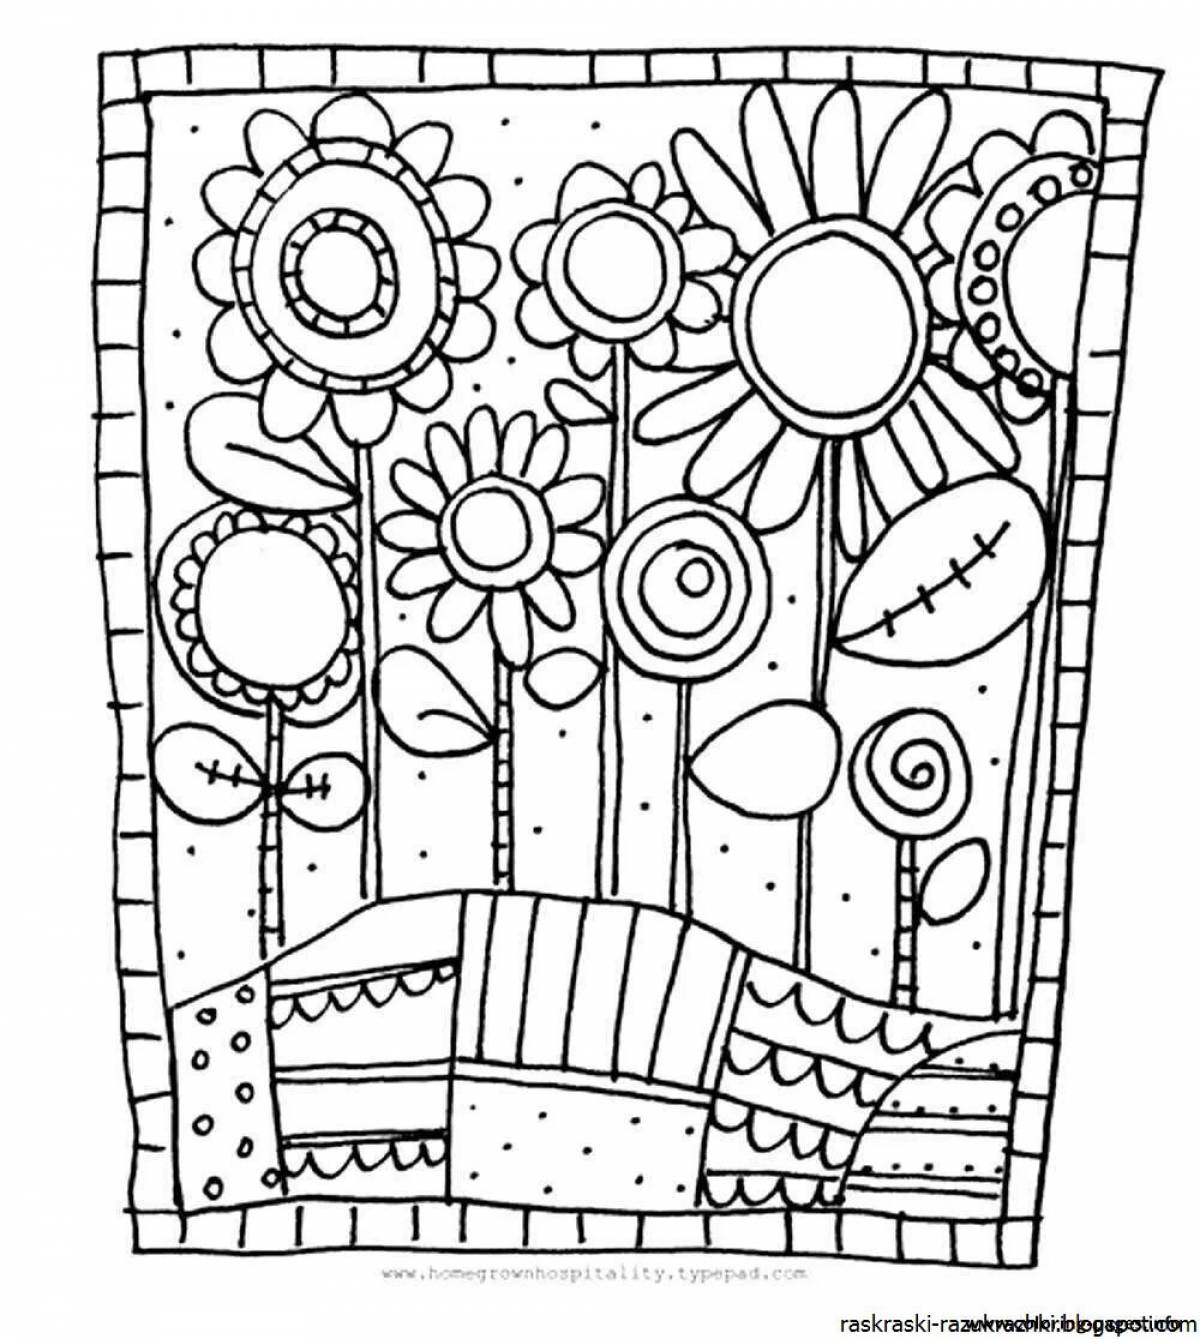 Colorful psychological coloring book for inquisitive preschoolers